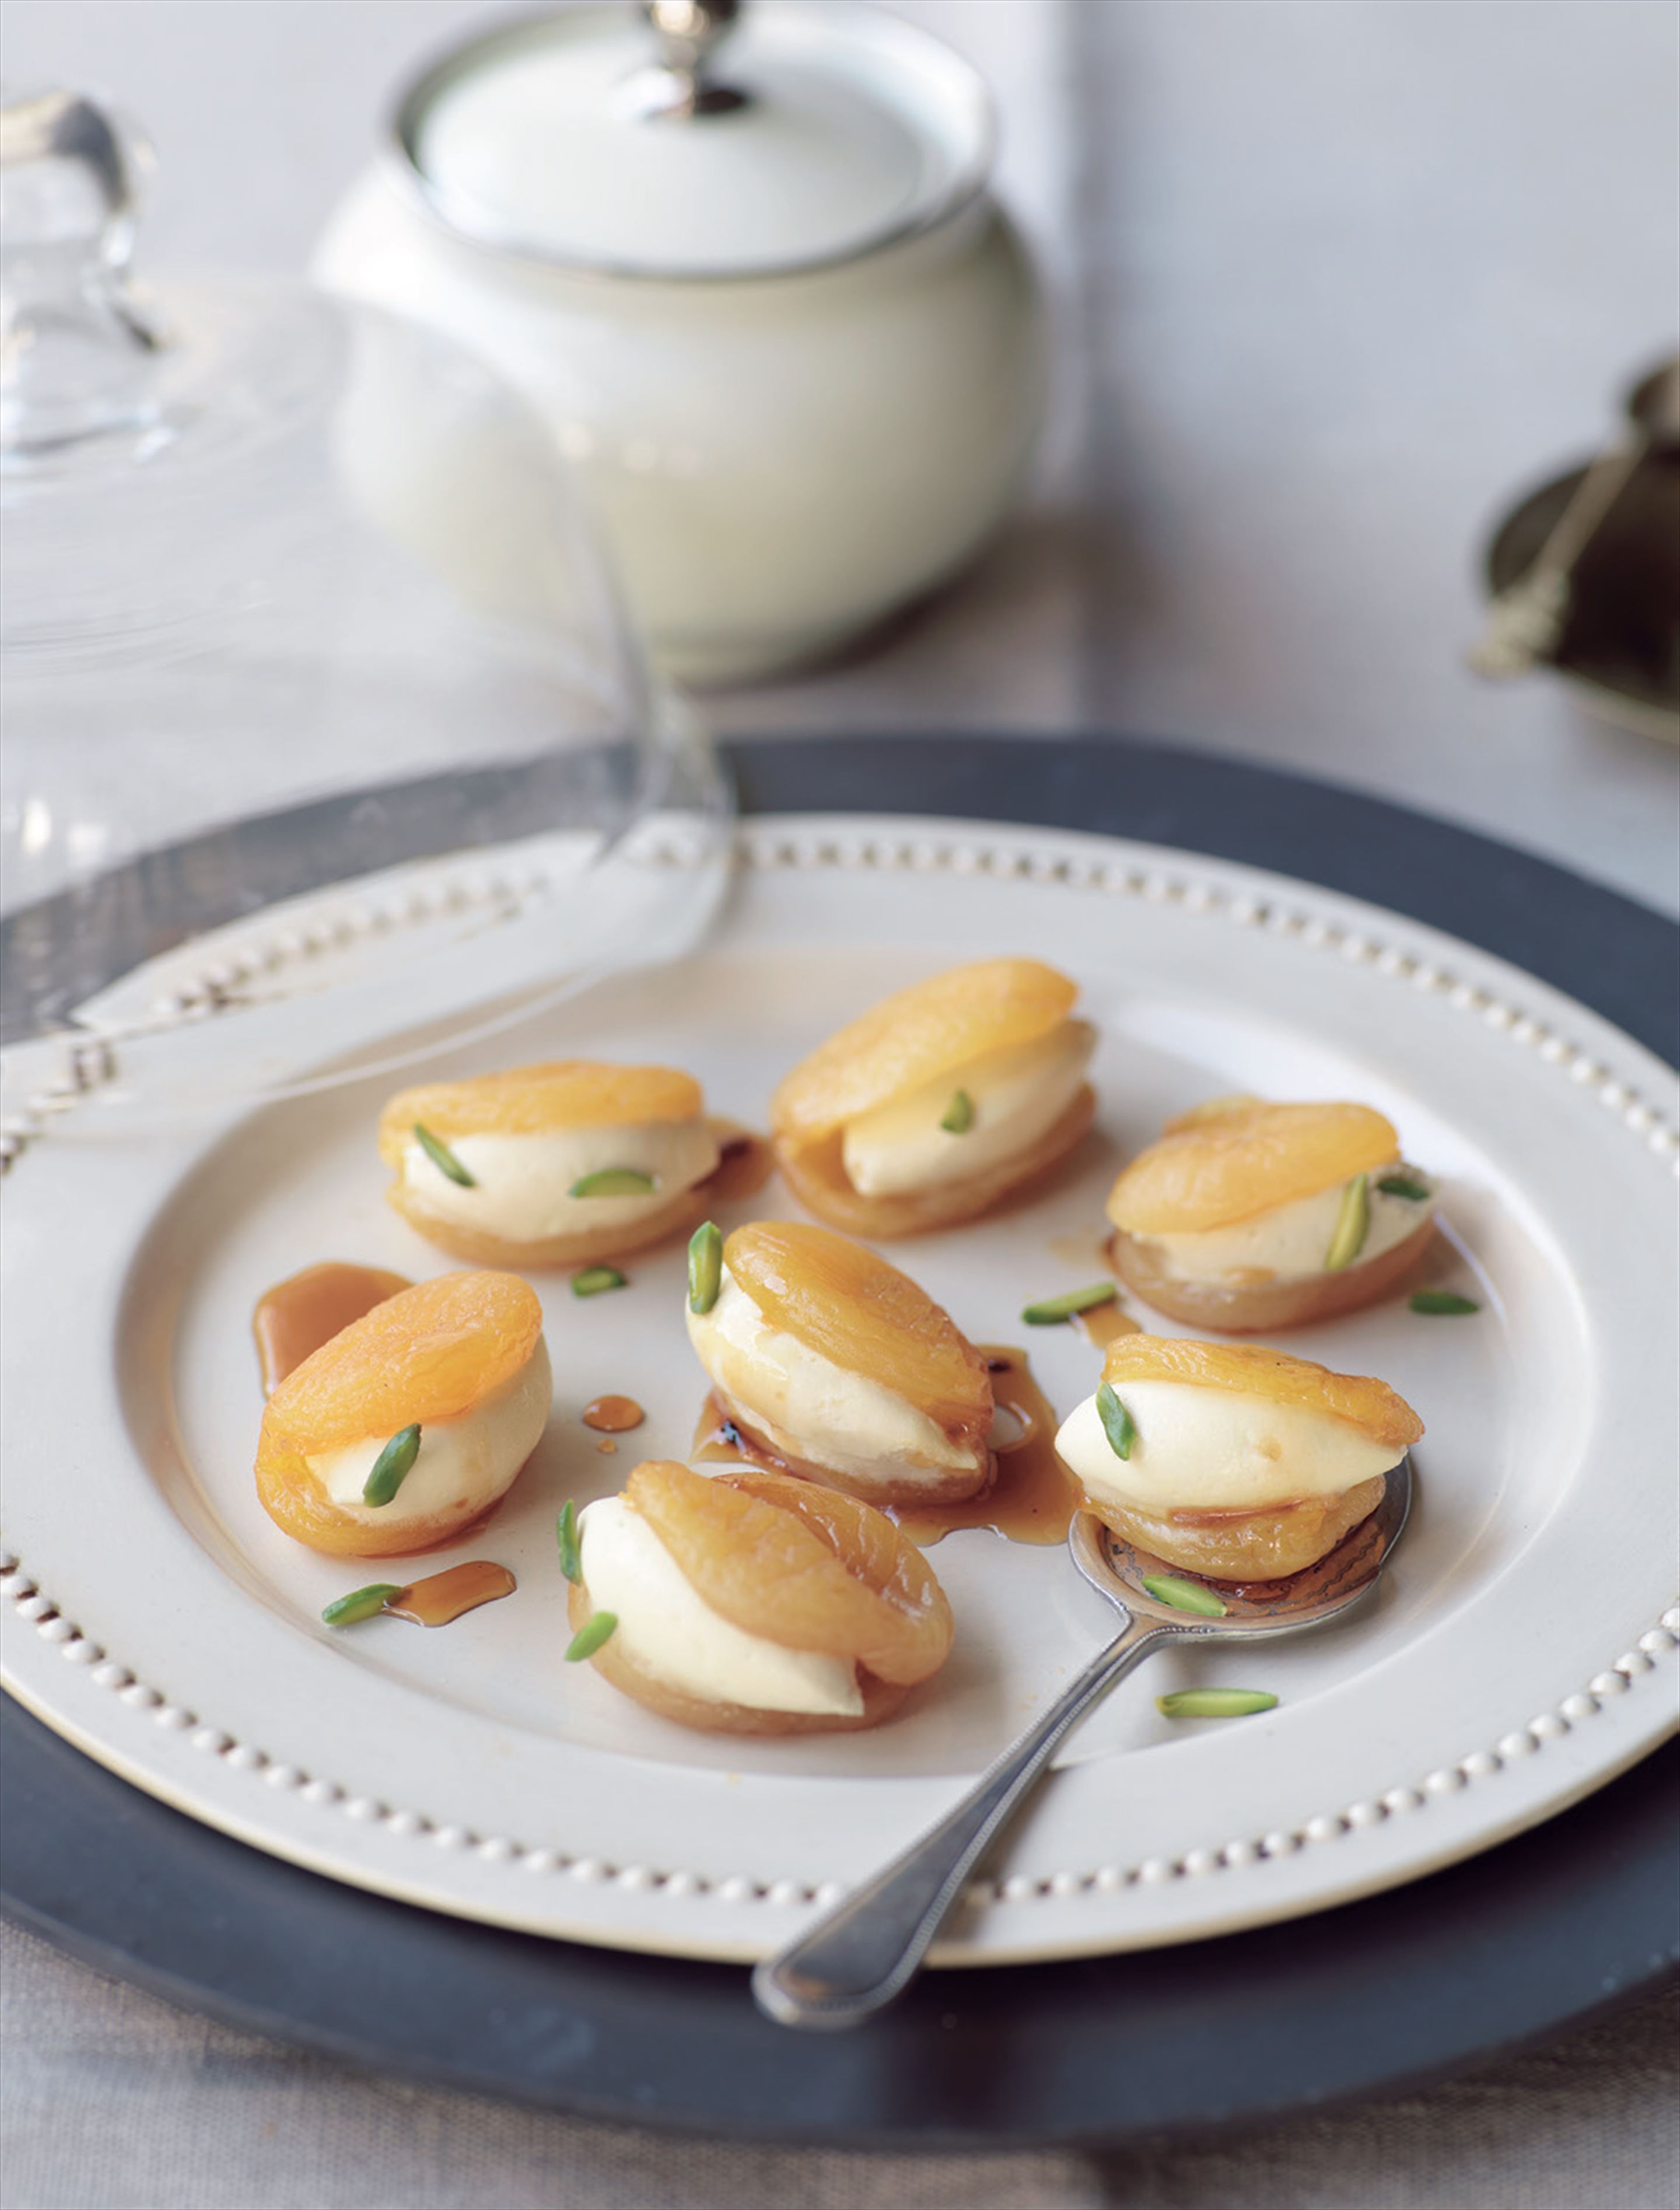 Sticky apricots stuffed with clotted cream